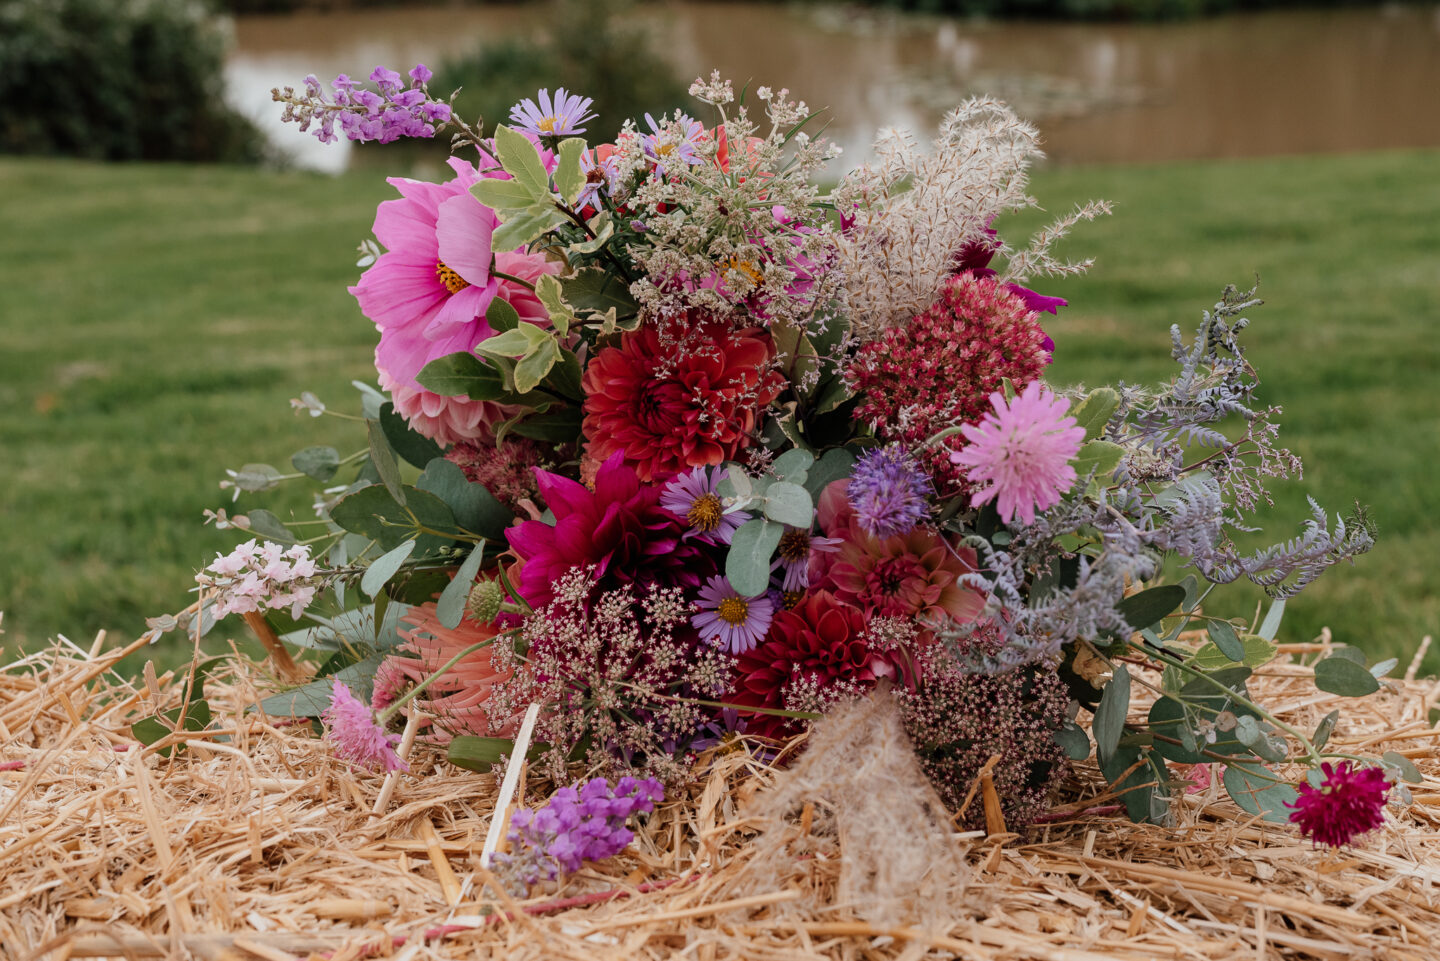 Floral Inspired Intimate Elopement At Crabapple Barn Sussex